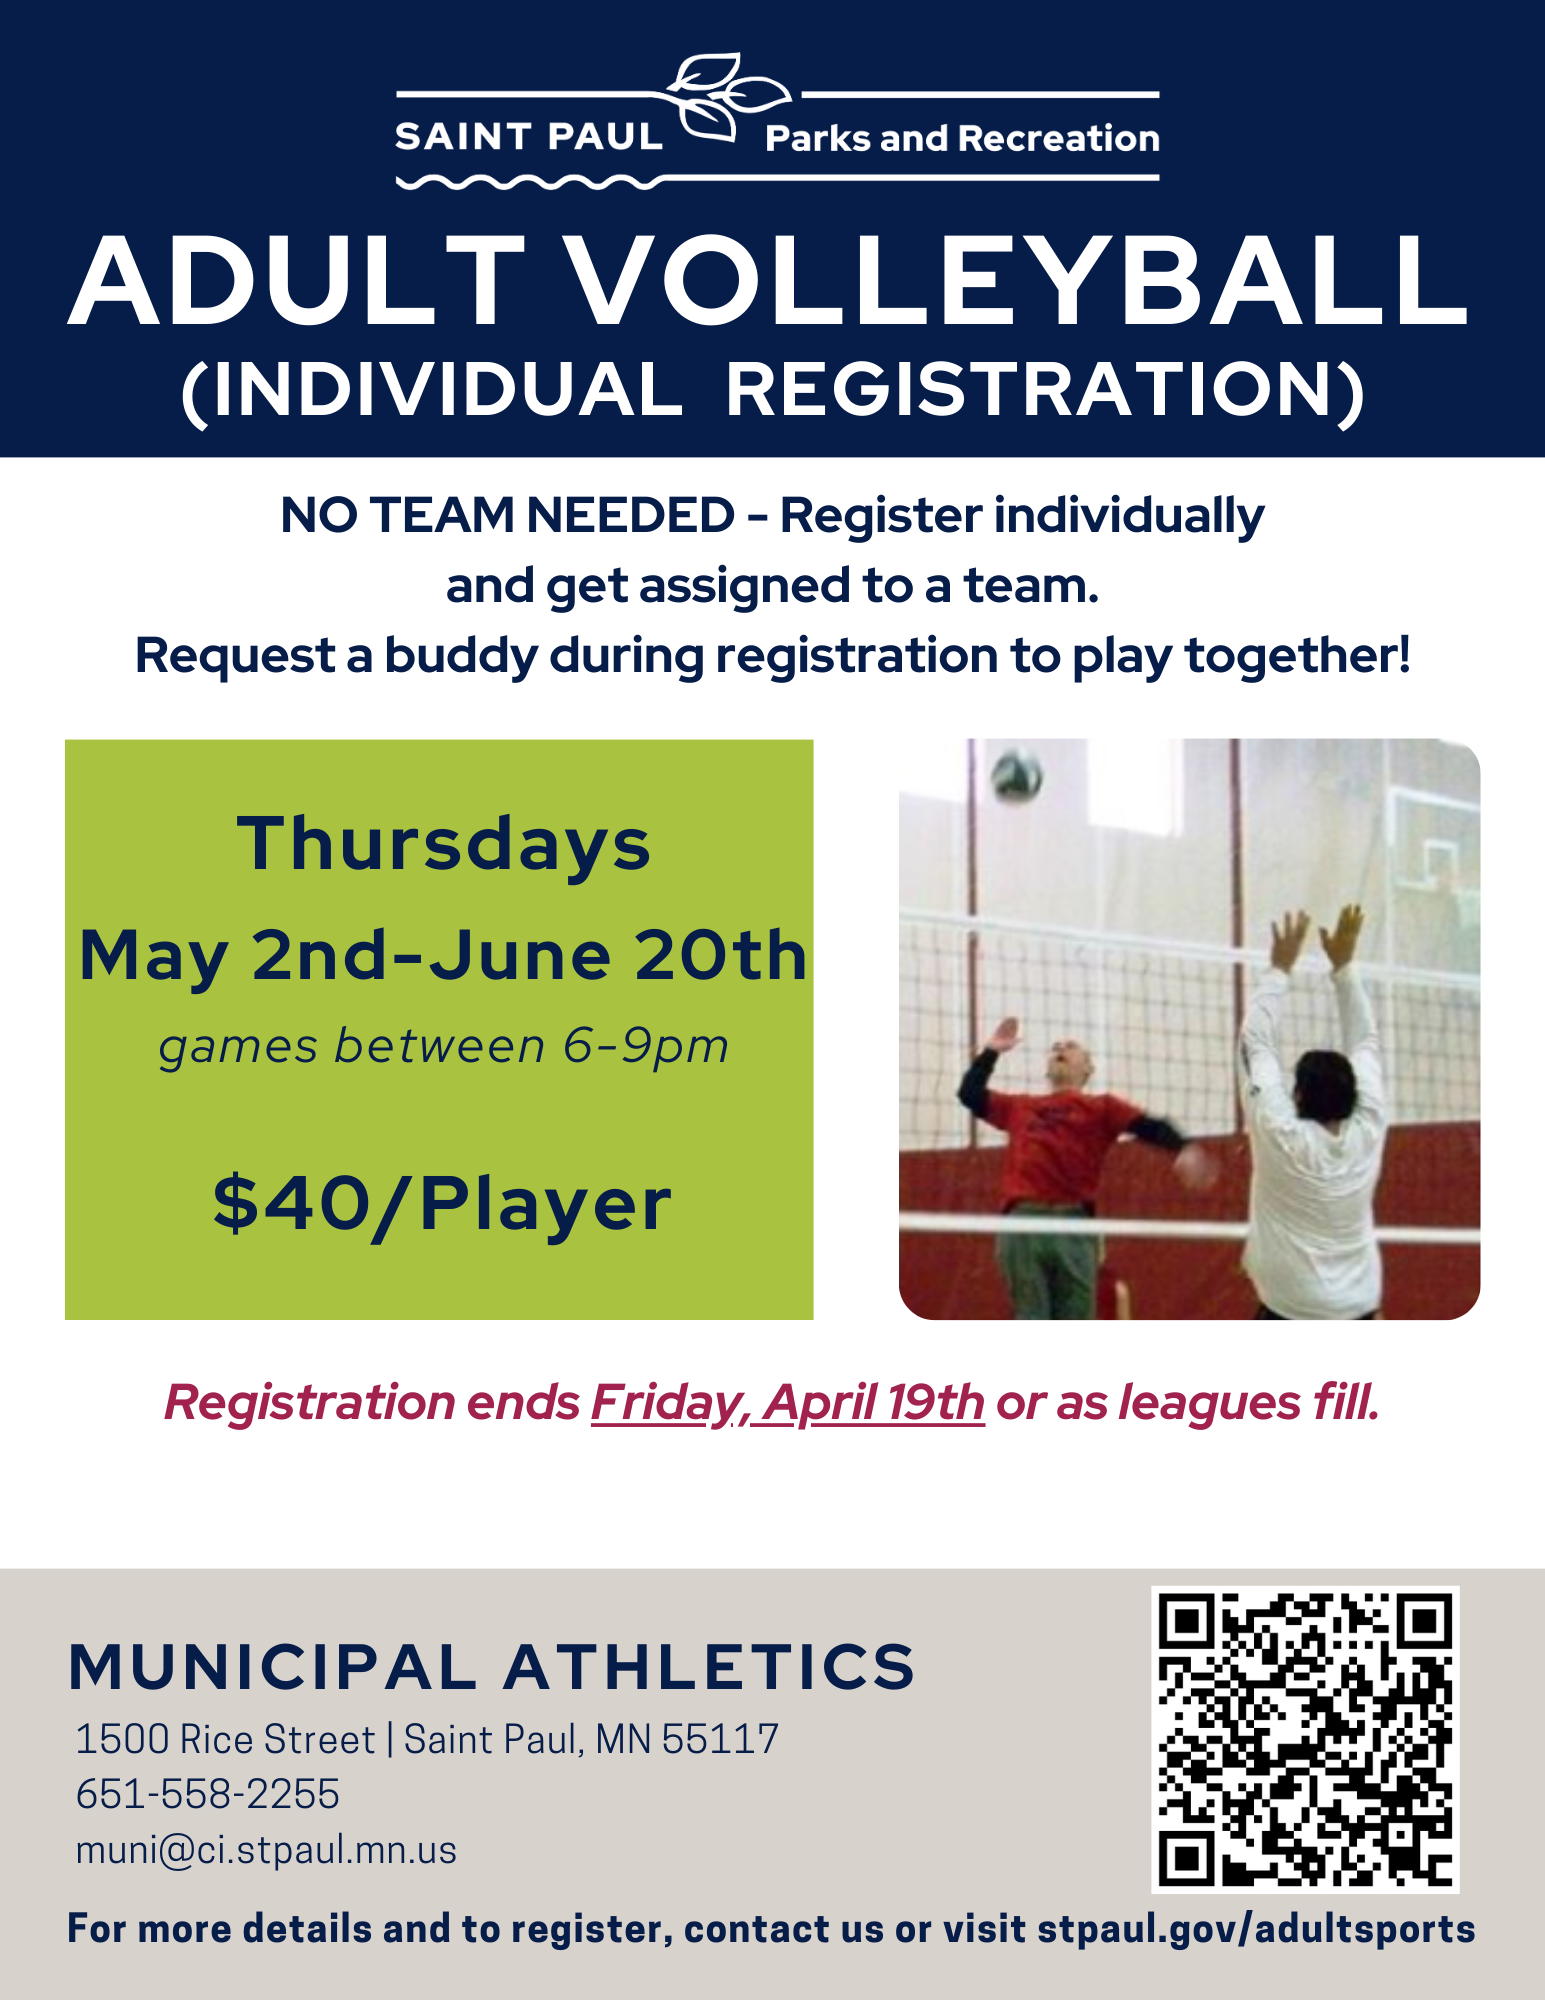 Adult Volleyball Individual Registration Flyer